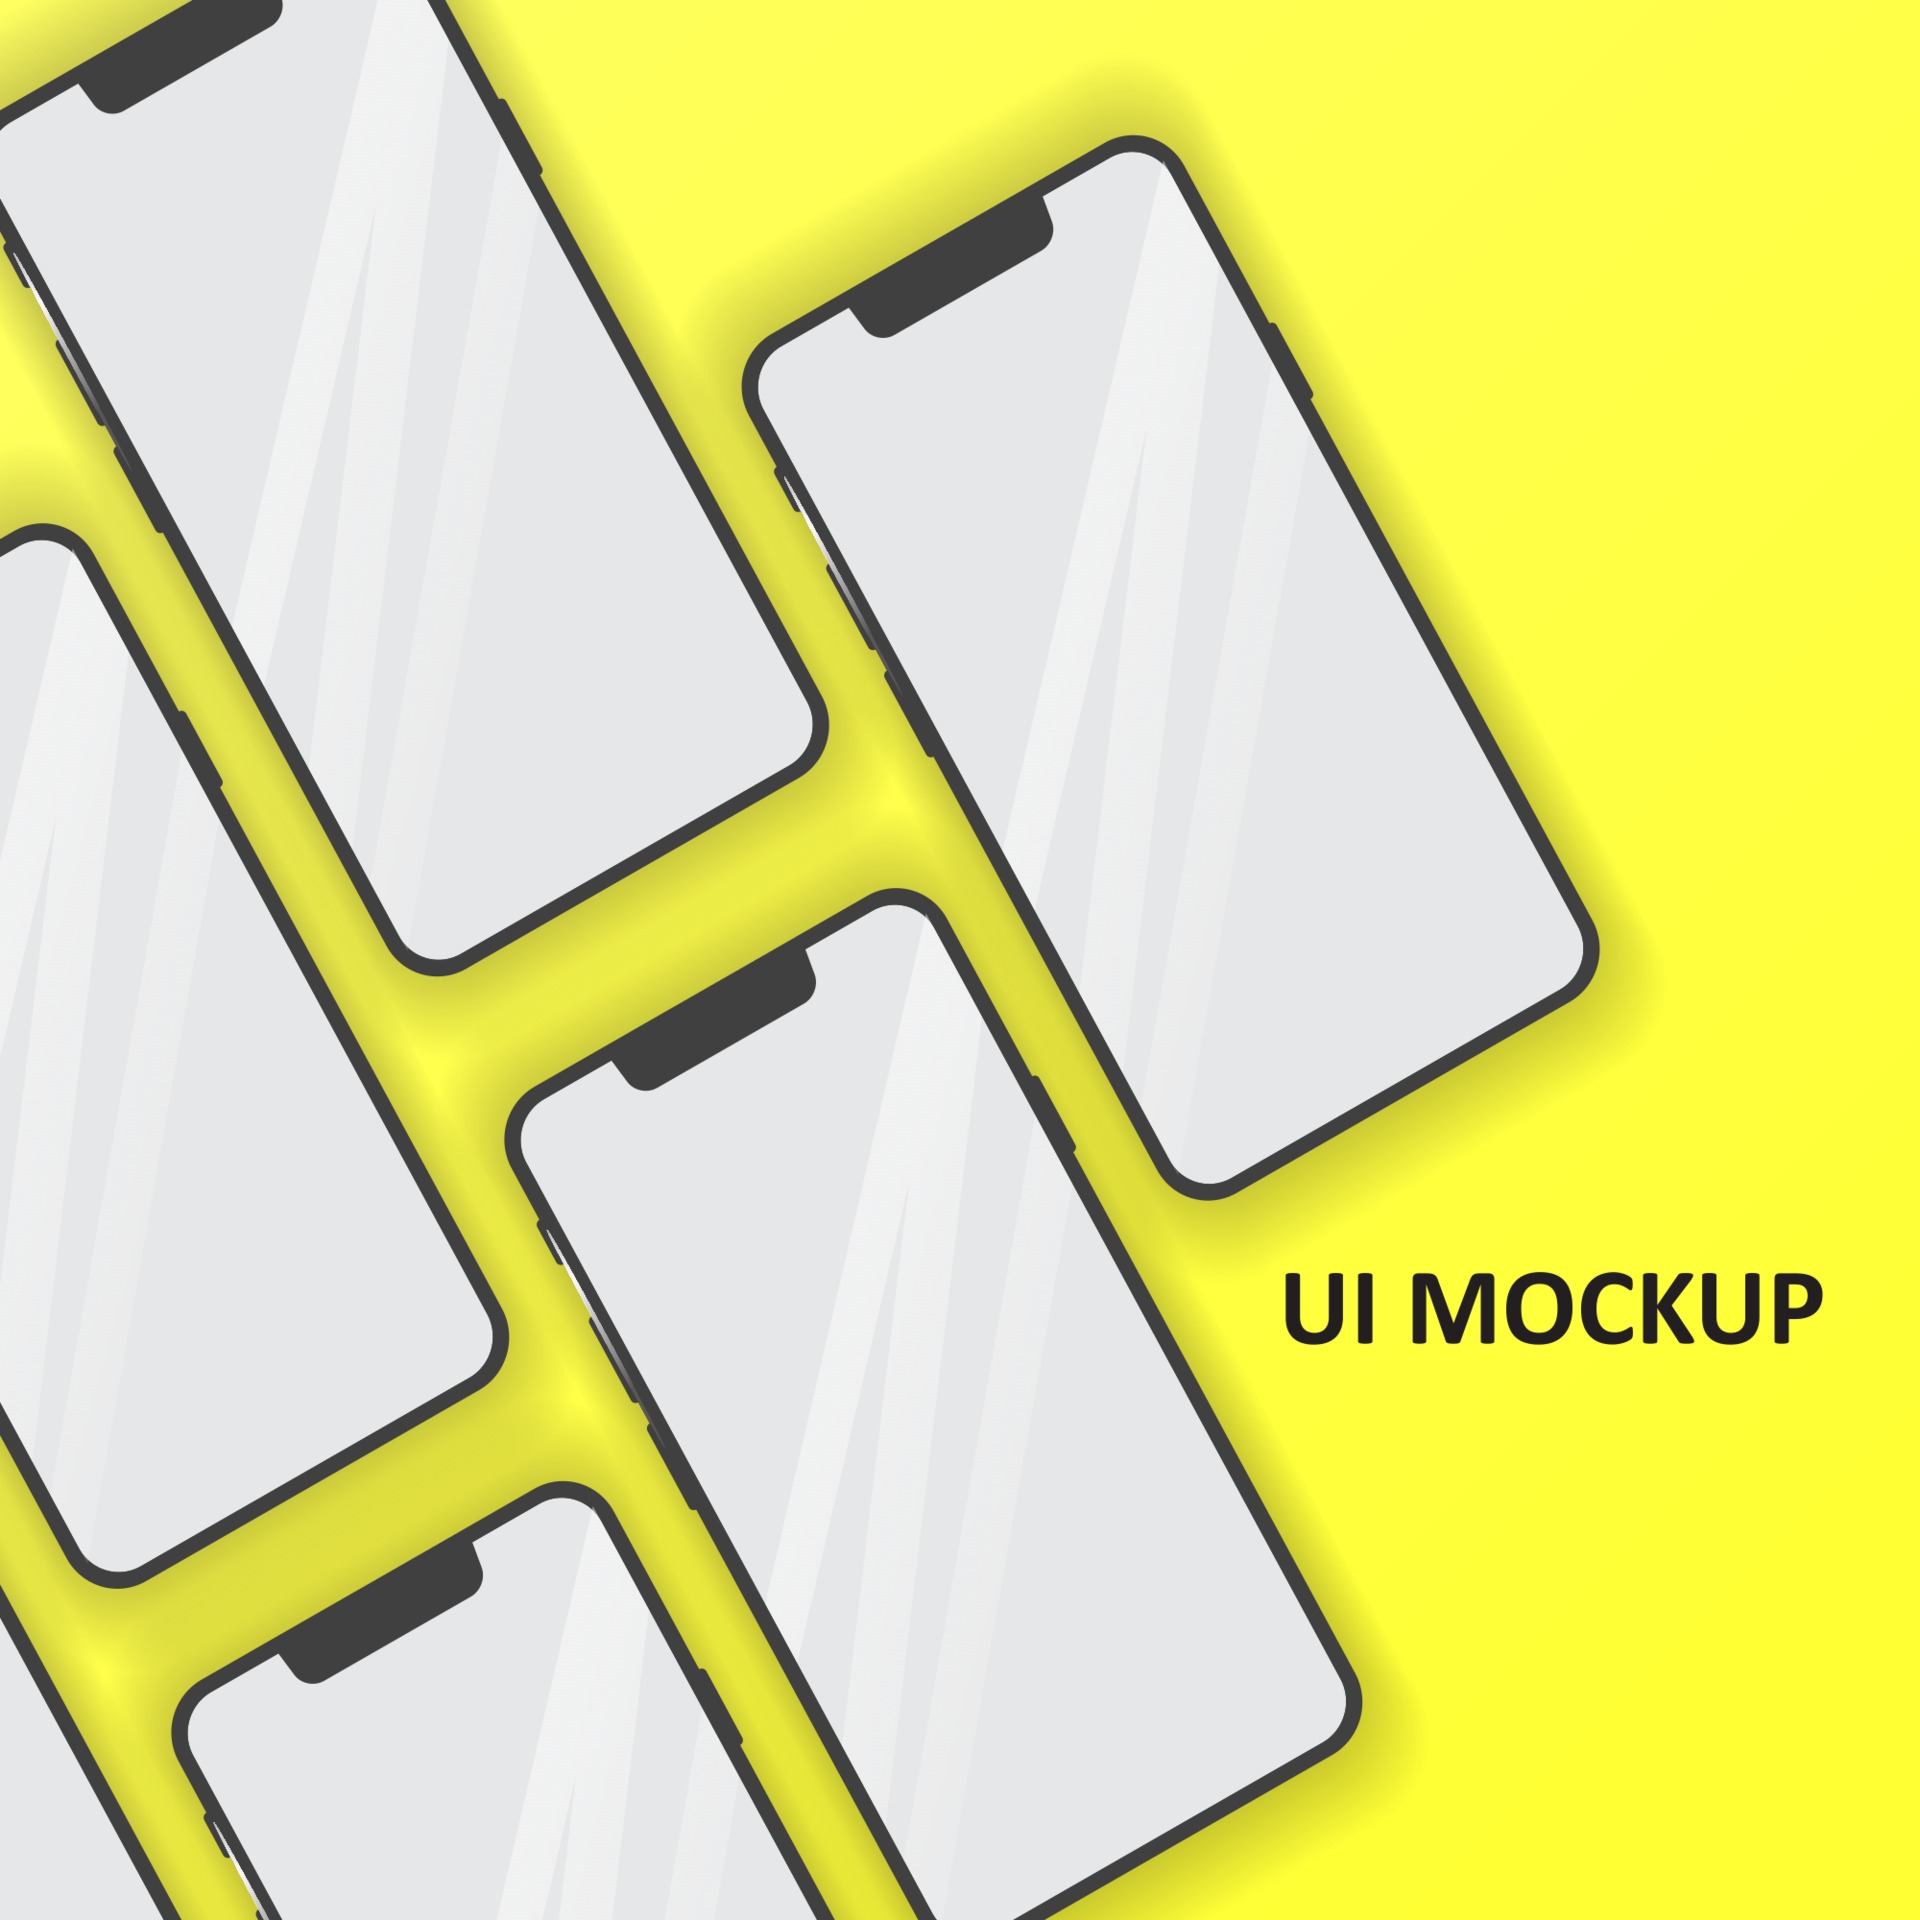 Fllat Lay Smartphone For Ui Design Mock Up Devices In Yellow Background 2000025 Vector Art At Vecteezy